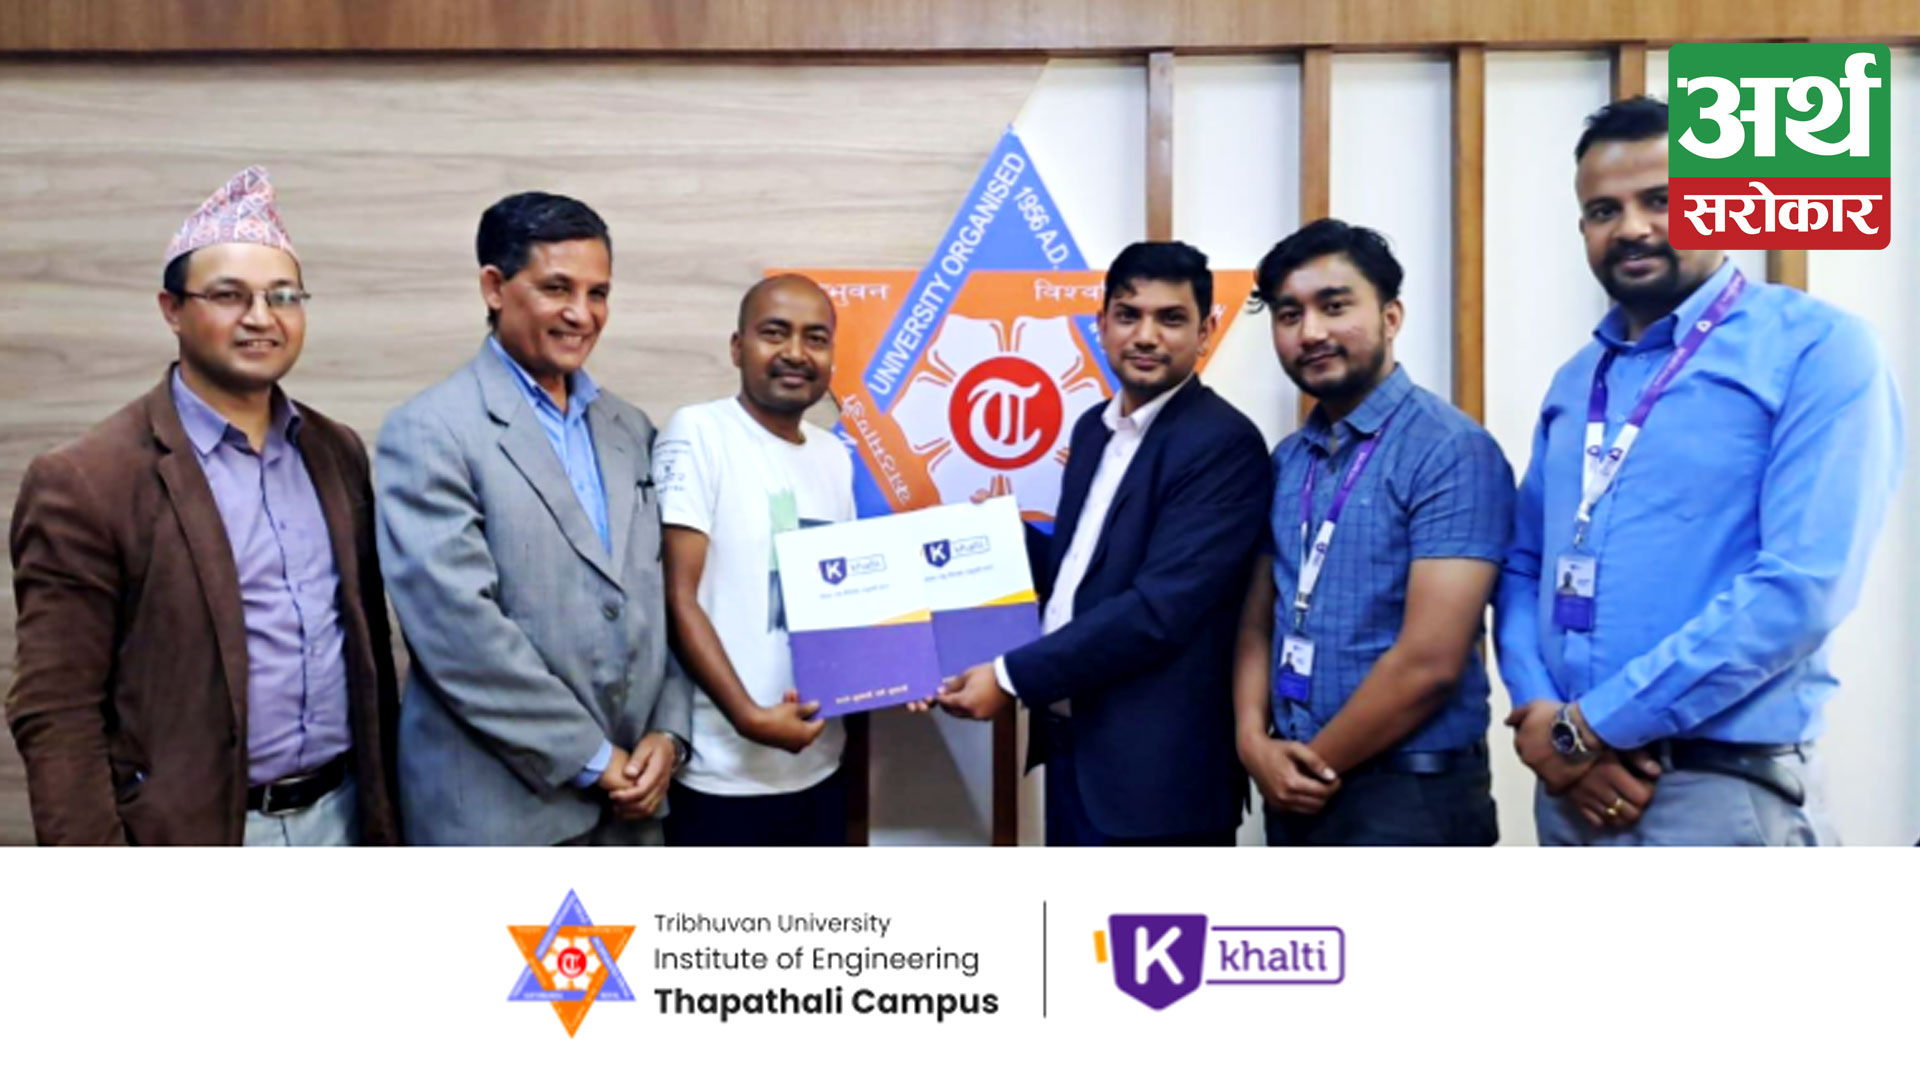 Khalti becomes the first digital wallet to partner with Thapathali Campus for fee payment